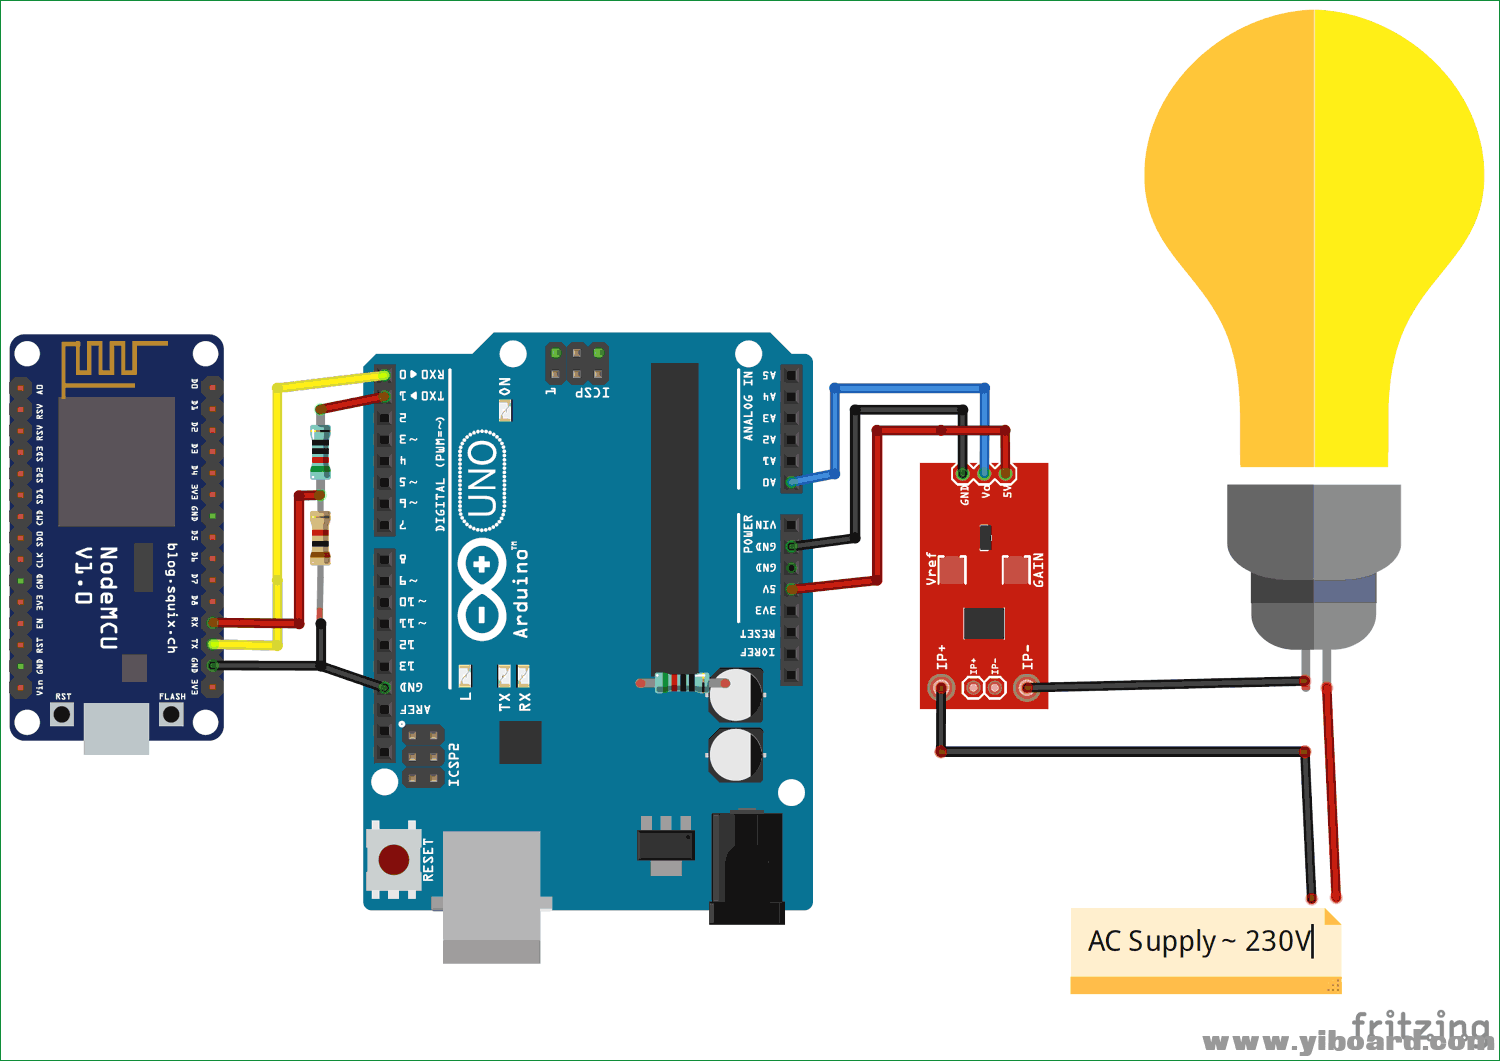 Circuit-Diagram-for-IoT-based-Electricity-Energy-Meter-using-ESP12-and-Arduino.png